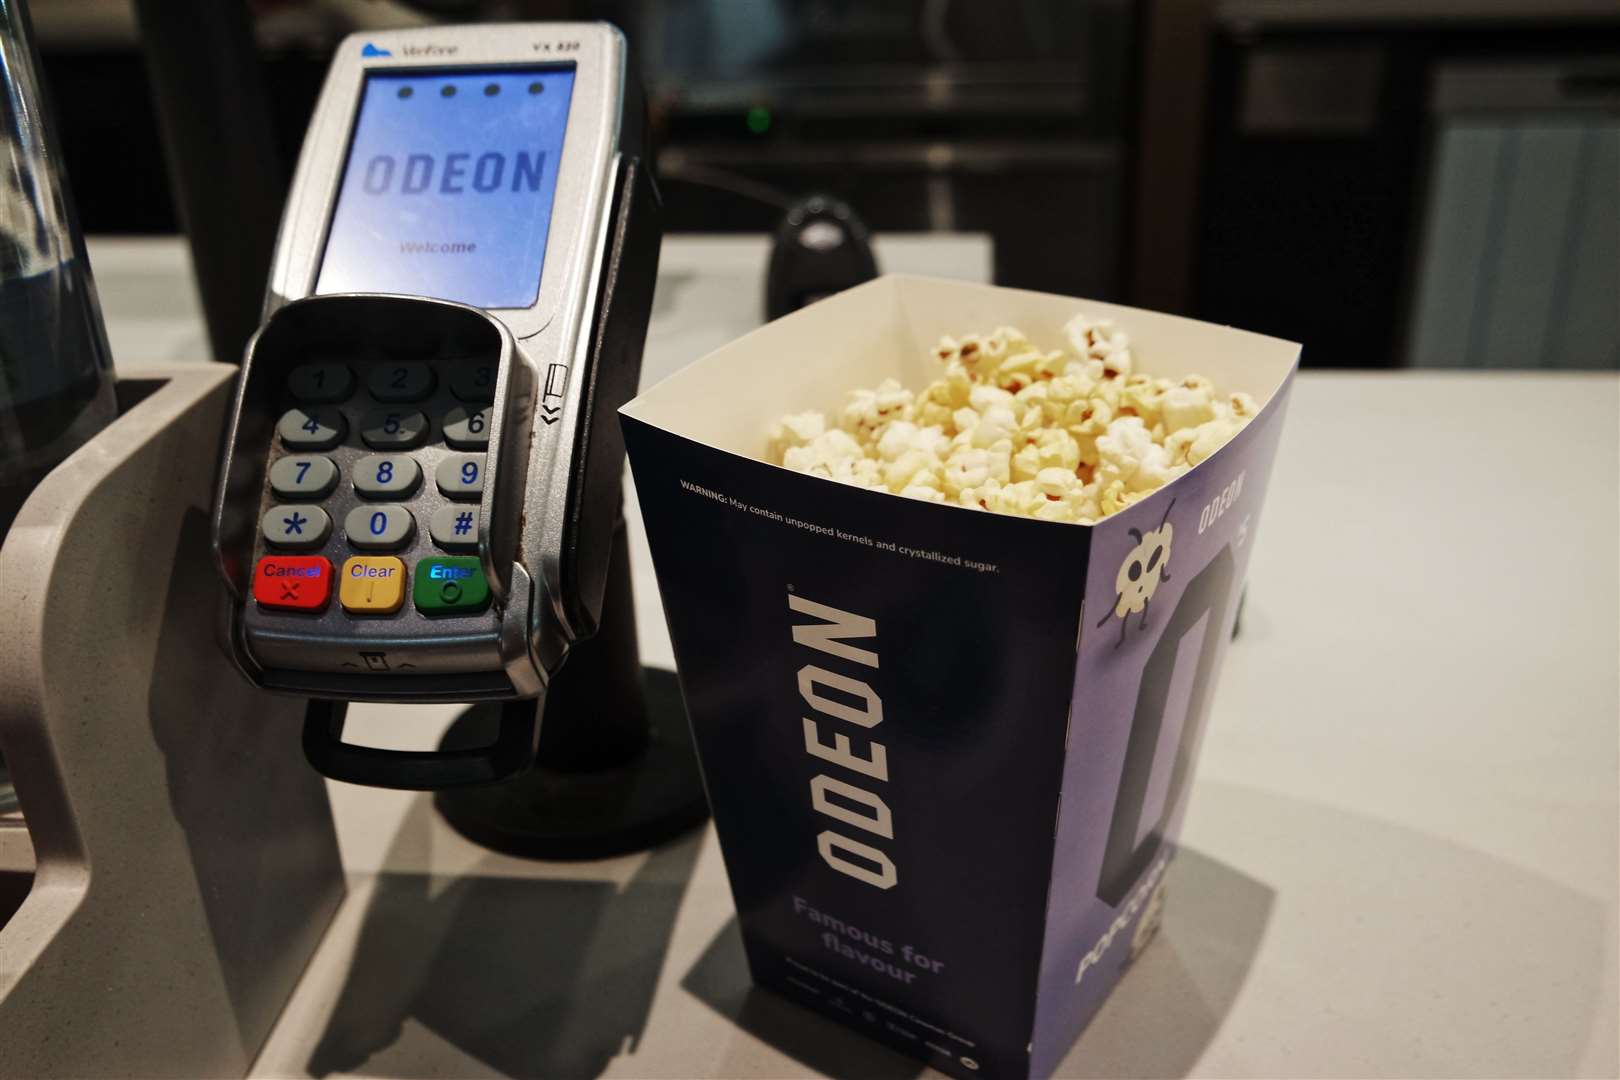 You will need a card to pay for your popcorn